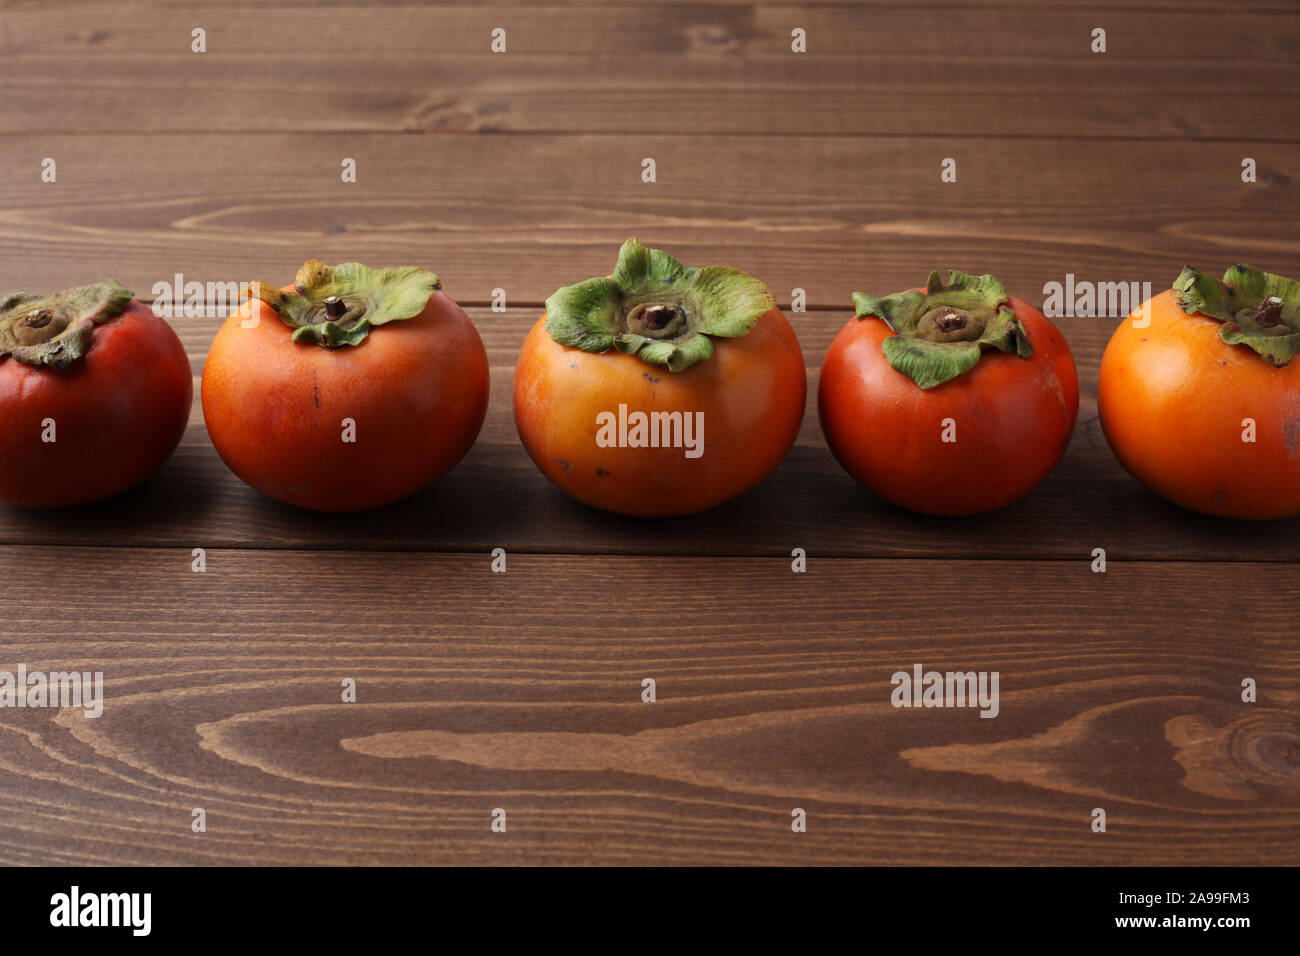 ripe persimmon isolated on wood table Stock Photo